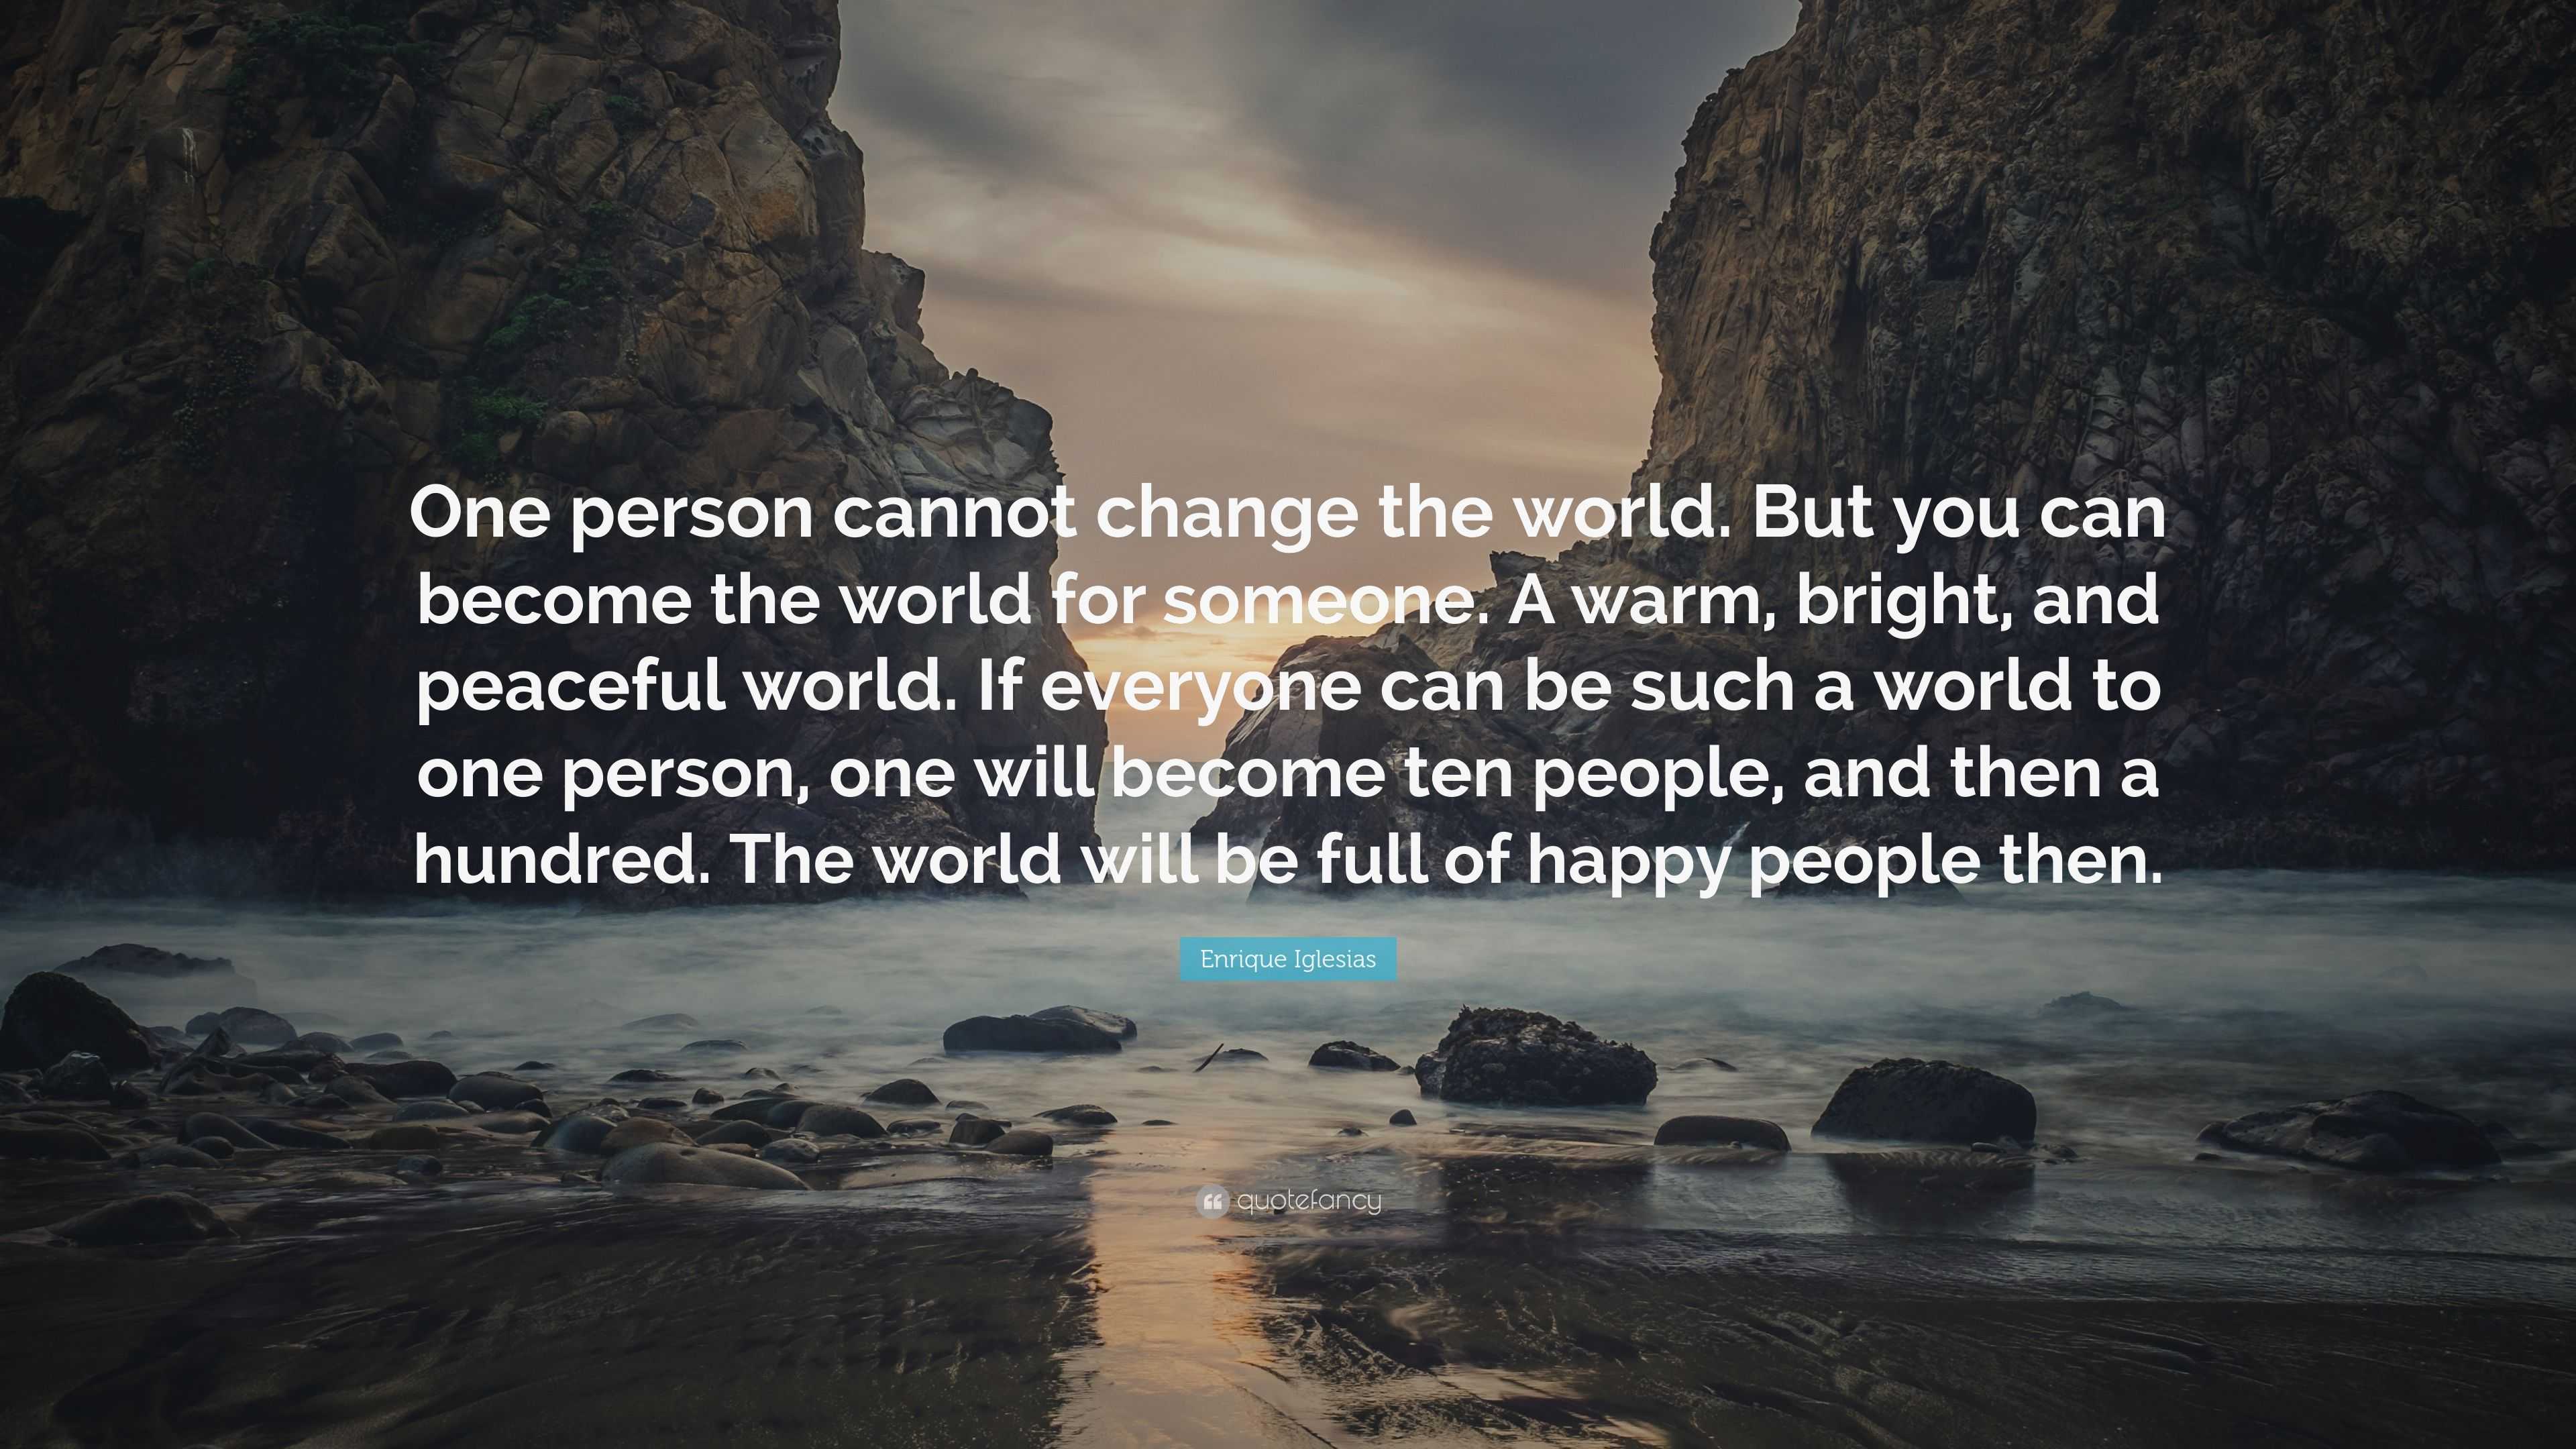 Enrique Iglesias Quote: "One person cannot change the world. But you can become the world for ...